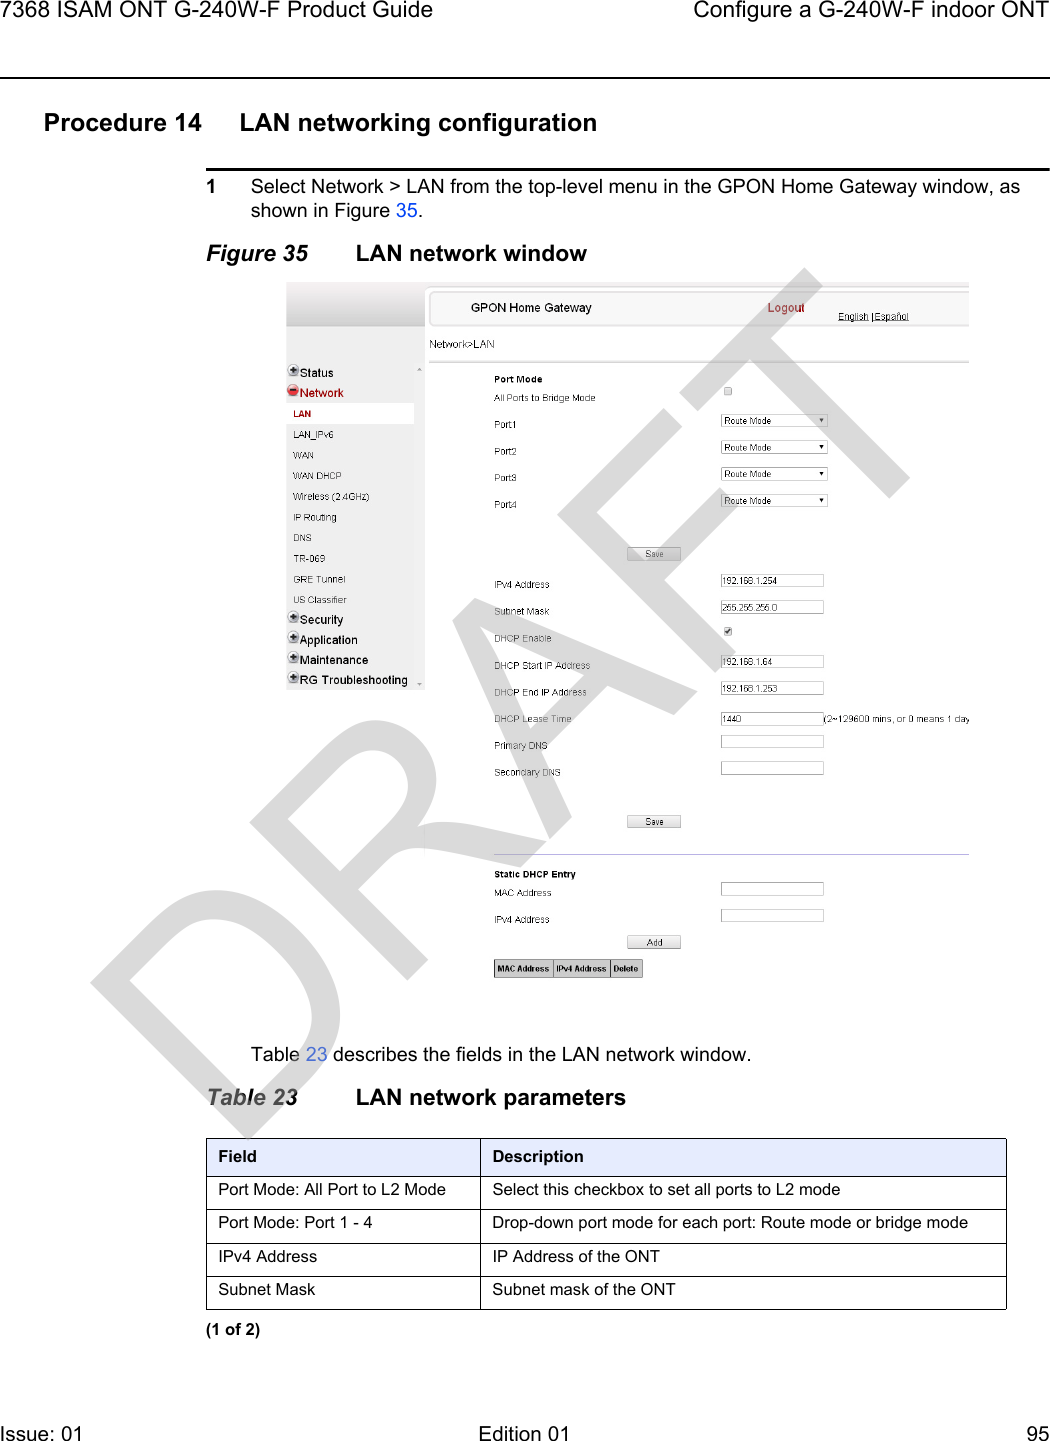 7368 ISAM ONT G-240W-F Product Guide Configure a G-240W-F indoor ONTIssue: 01 Edition 01 95 Procedure 14 LAN networking configuration1Select Network &gt; LAN from the top-level menu in the GPON Home Gateway window, as shown in Figure 35.Figure 35 LAN network windowTable 23 describes the fields in the LAN network window.Table 23 LAN network parametersField DescriptionPort Mode: All Port to L2 Mode Select this checkbox to set all ports to L2 modePort Mode: Port 1 - 4 Drop-down port mode for each port: Route mode or bridge modeIPv4 Address IP Address of the ONTSubnet Mask Subnet mask of the ONT(1 of 2)DRAFT